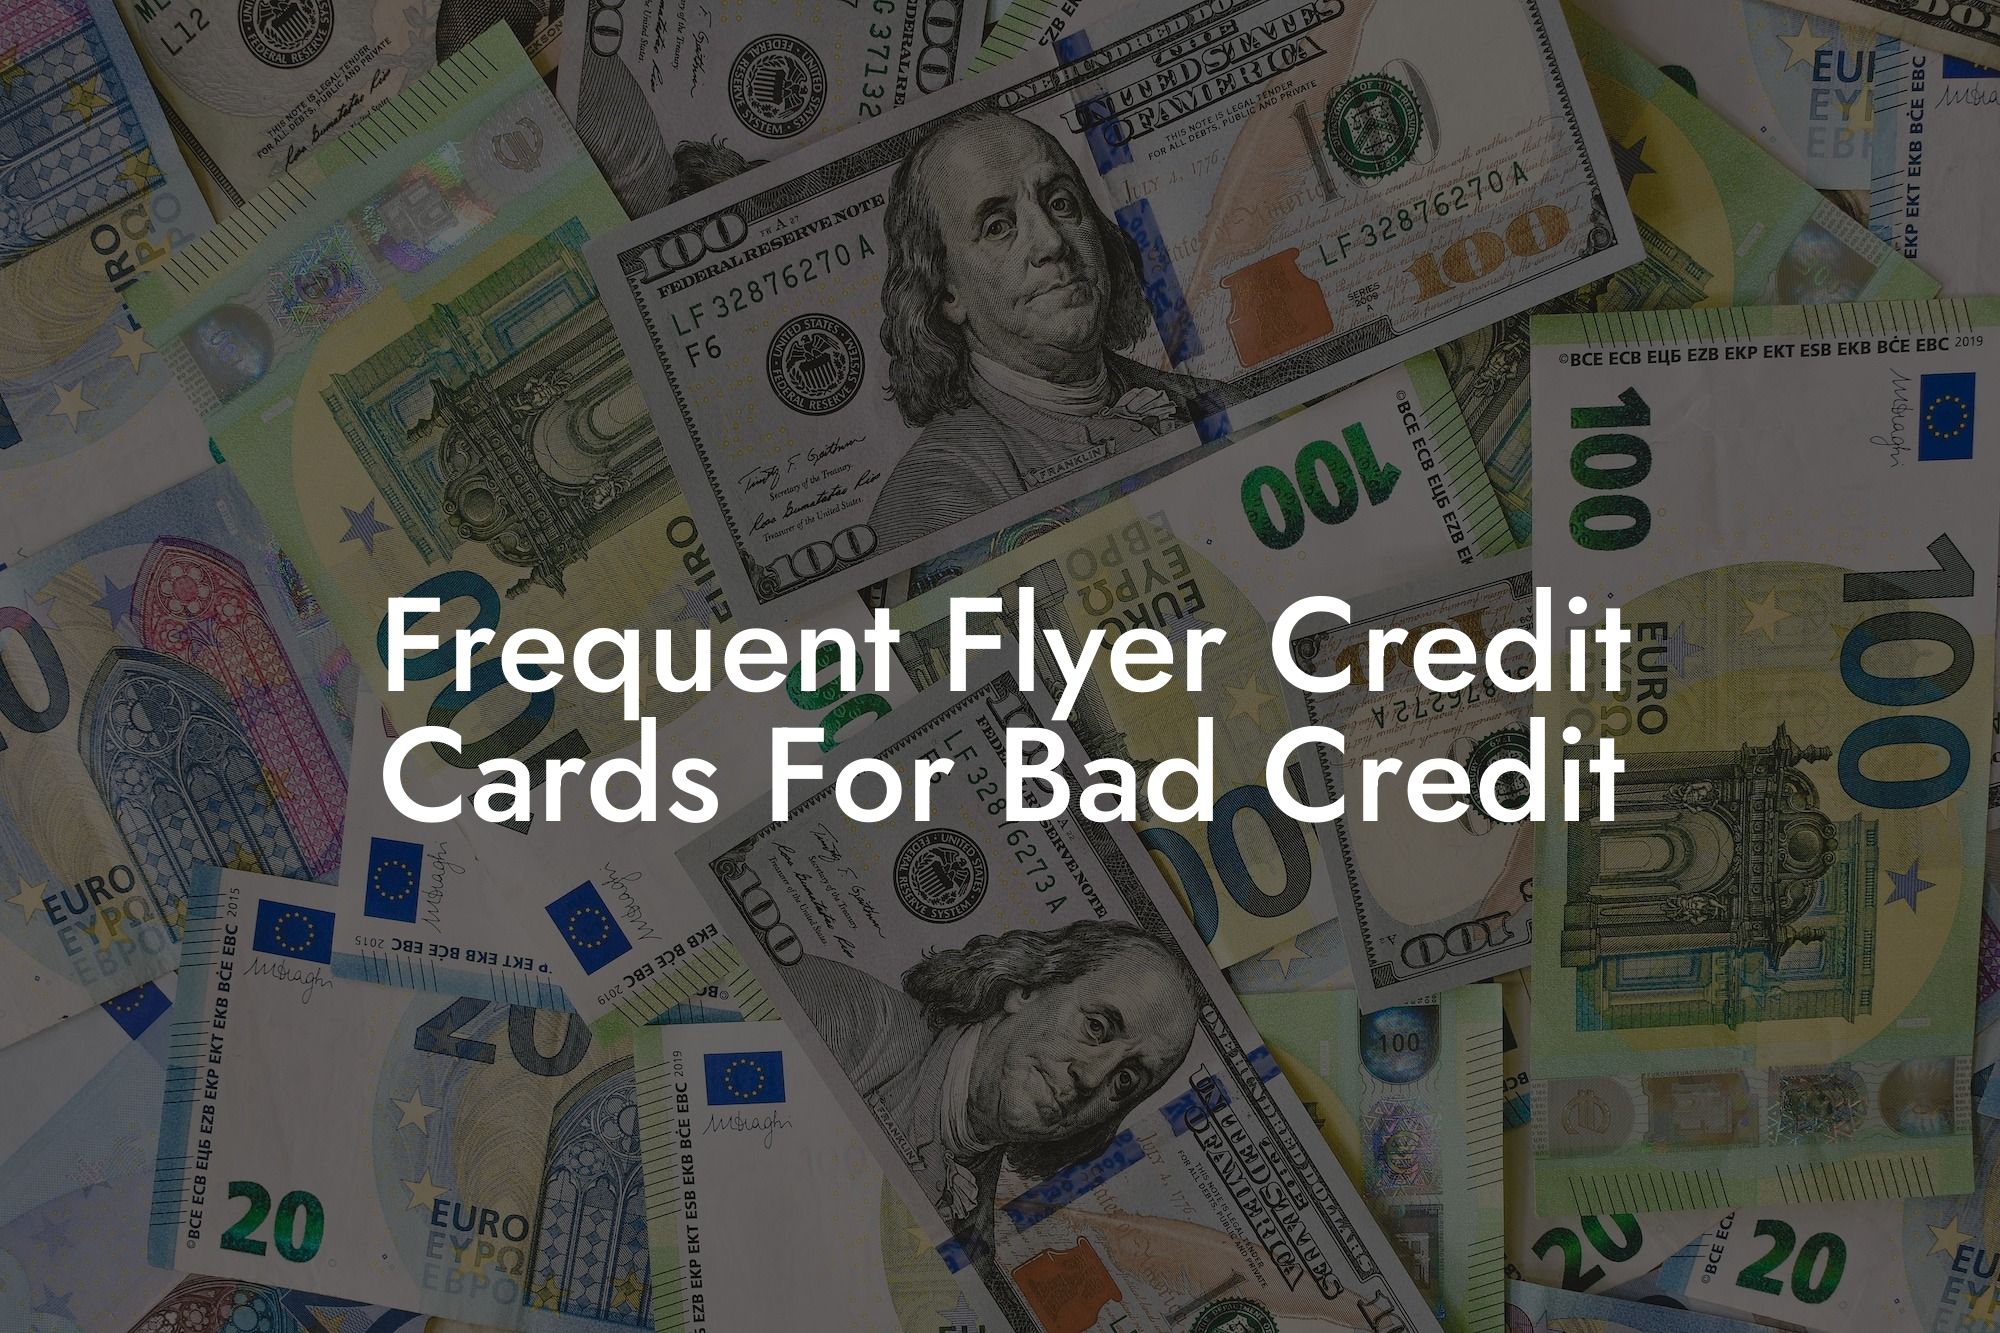 Frequent Flyer Credit Cards For Bad Credit